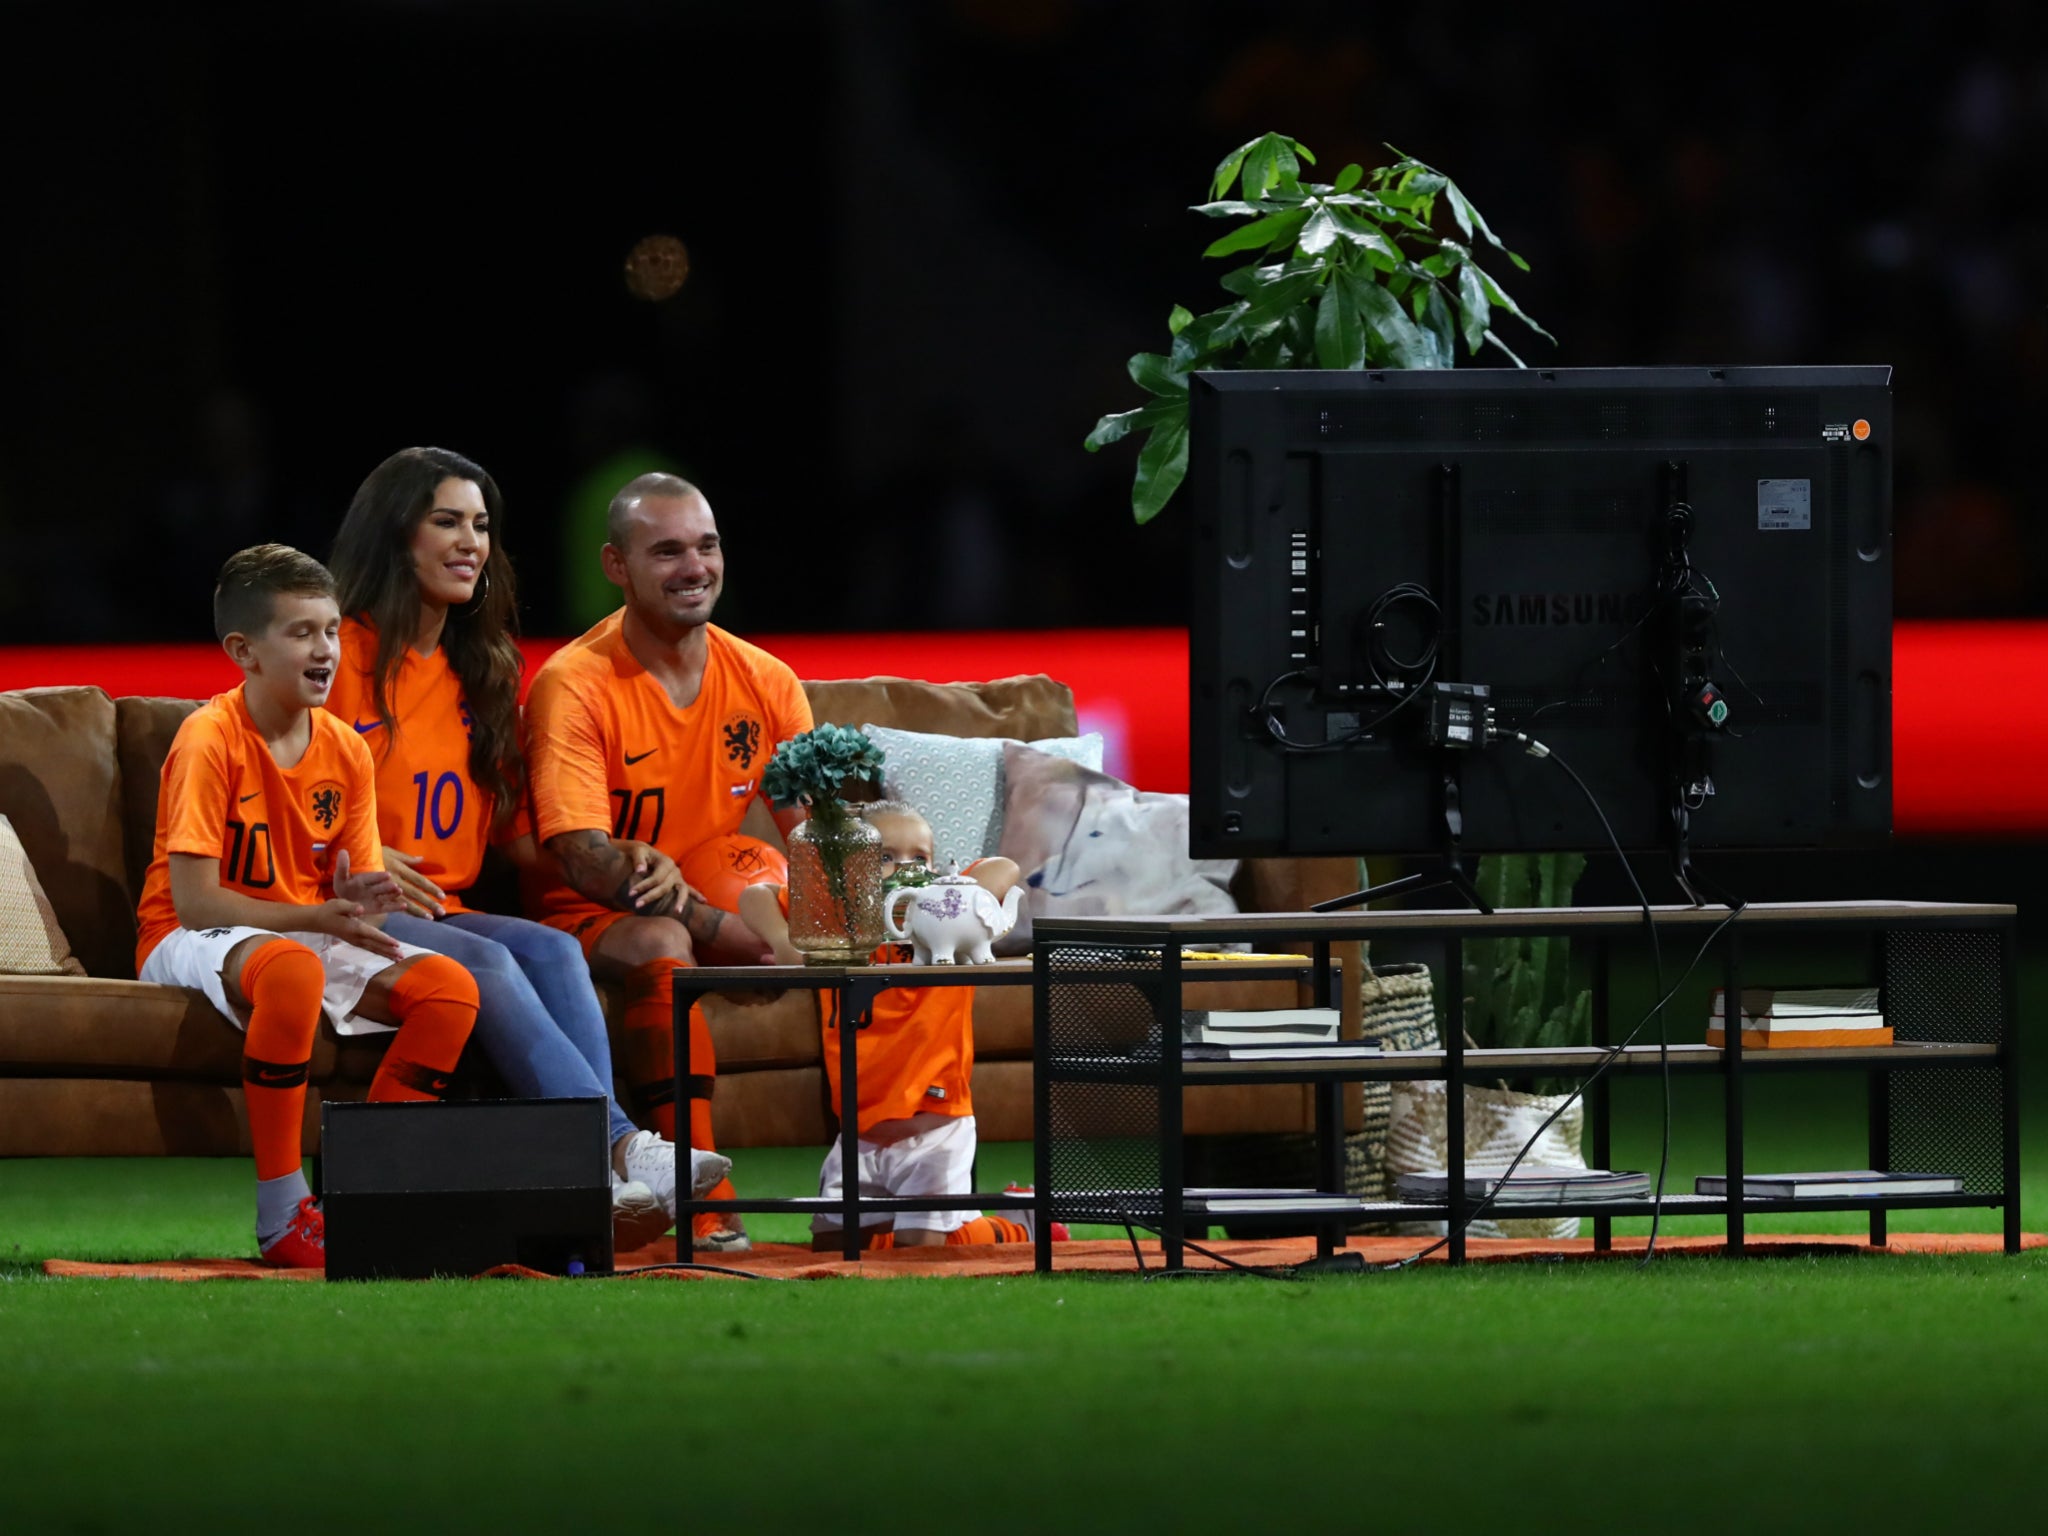 Wesley Sneijder watches TV tributes from a sofa on the pitch with family after final Netherlands appearance